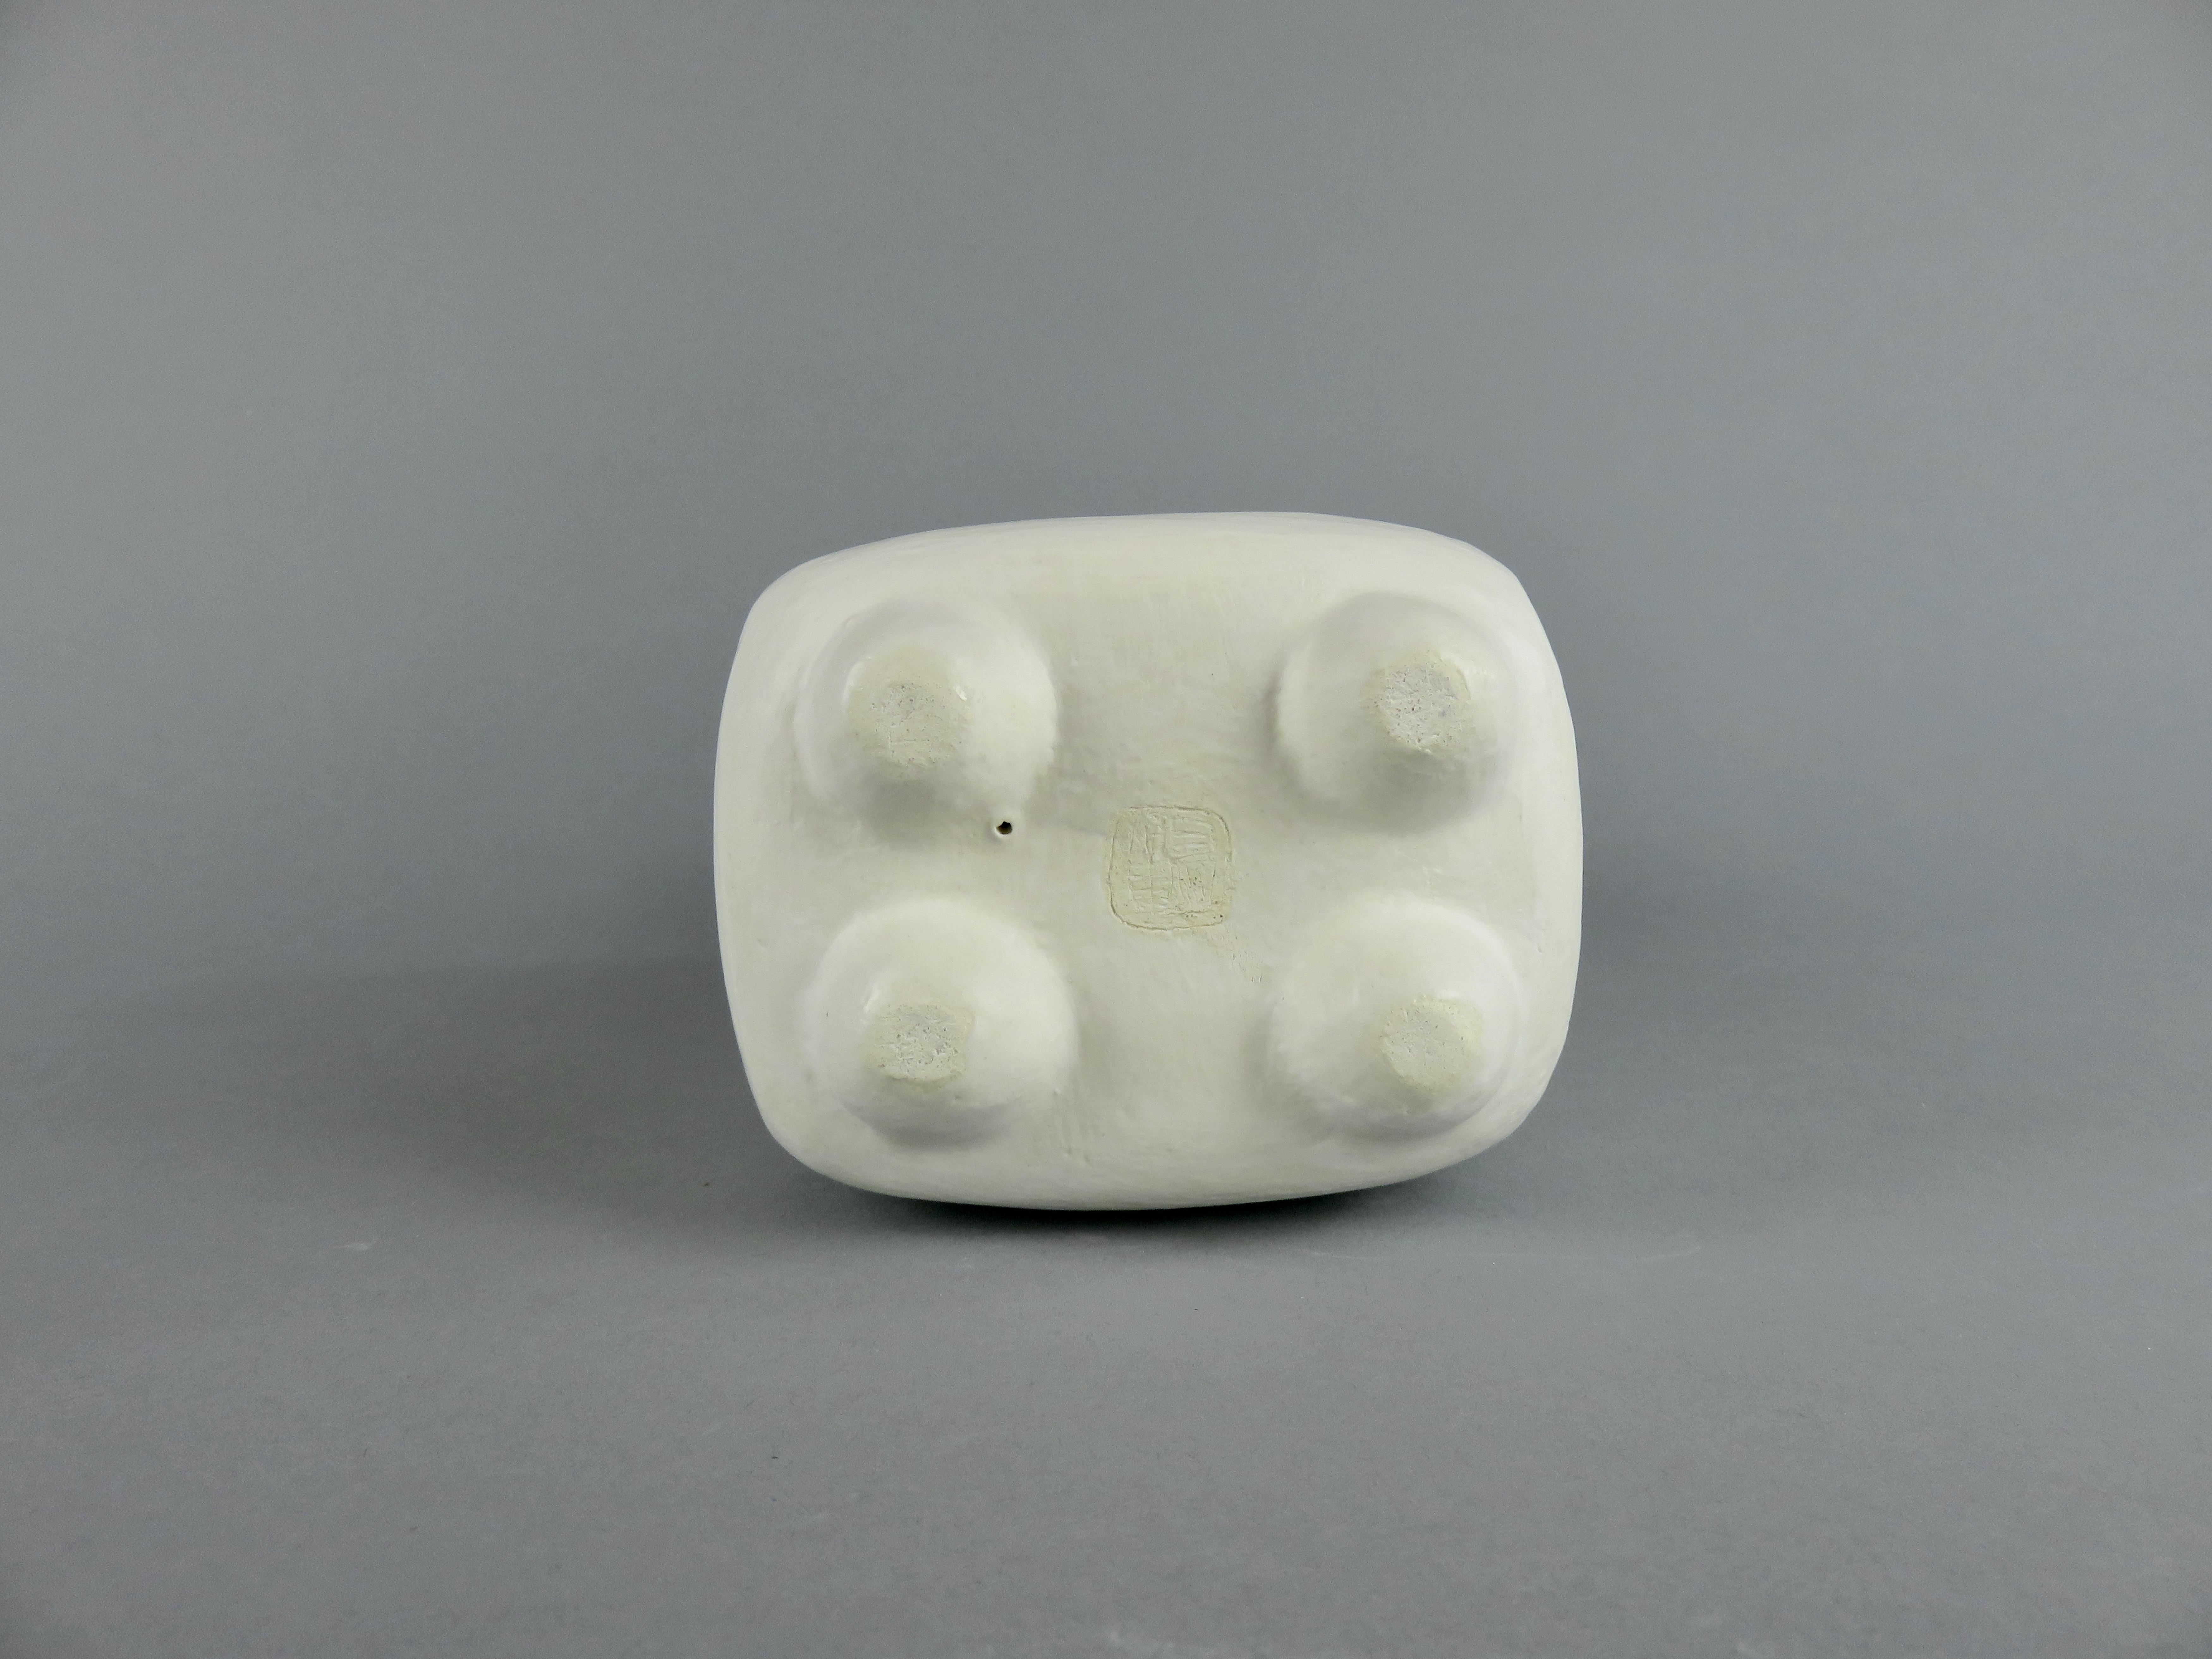 Creamy White 3-Part Totem, Rectangular Cup on Top, Hand Built Ceramic Sculpture For Sale 5